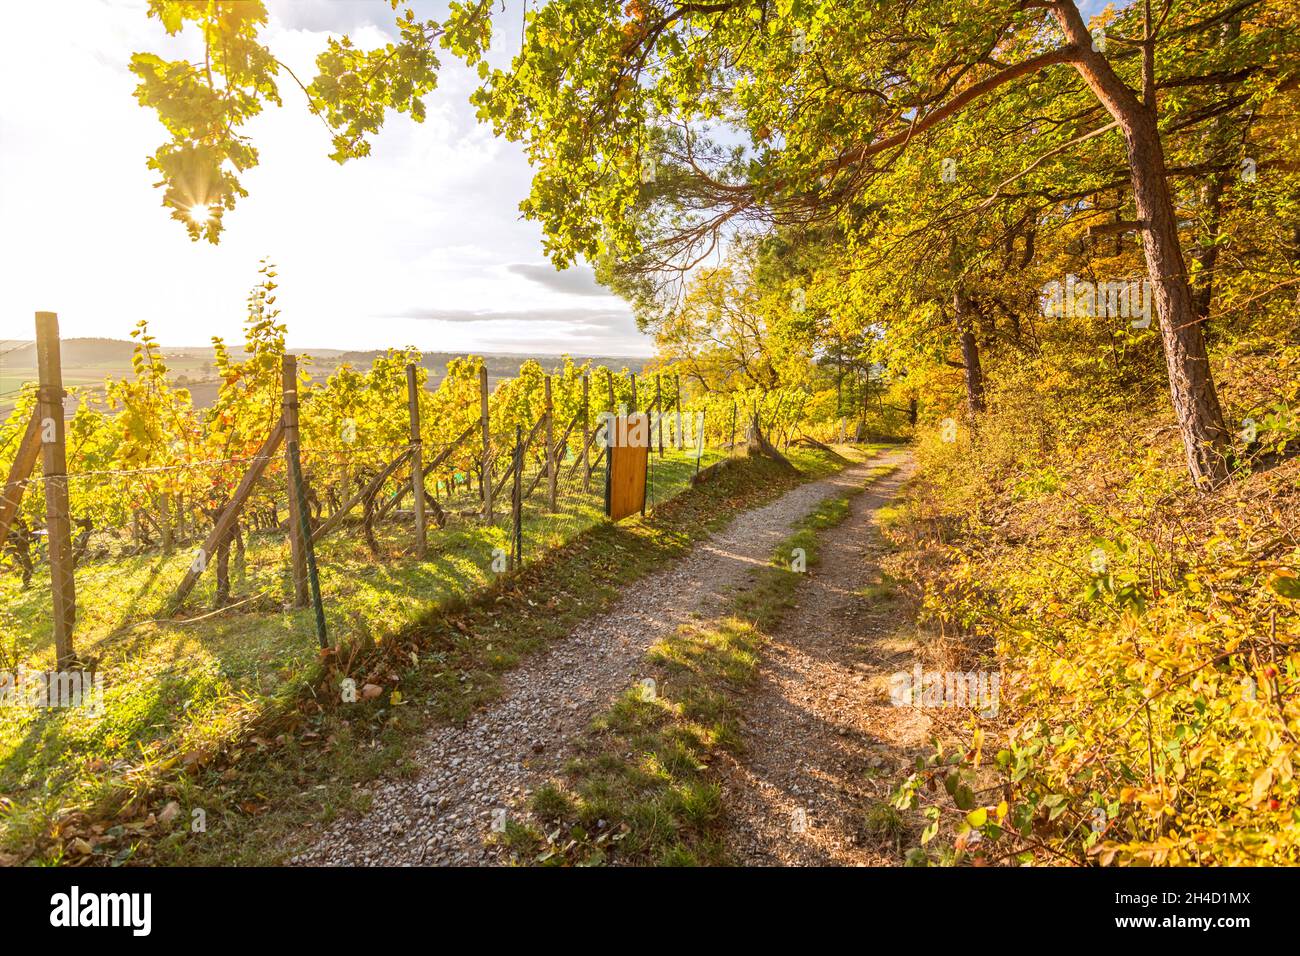 Hiking trail through a vineyard in colourful autumnal landscape in Southern Germany Stock Photo